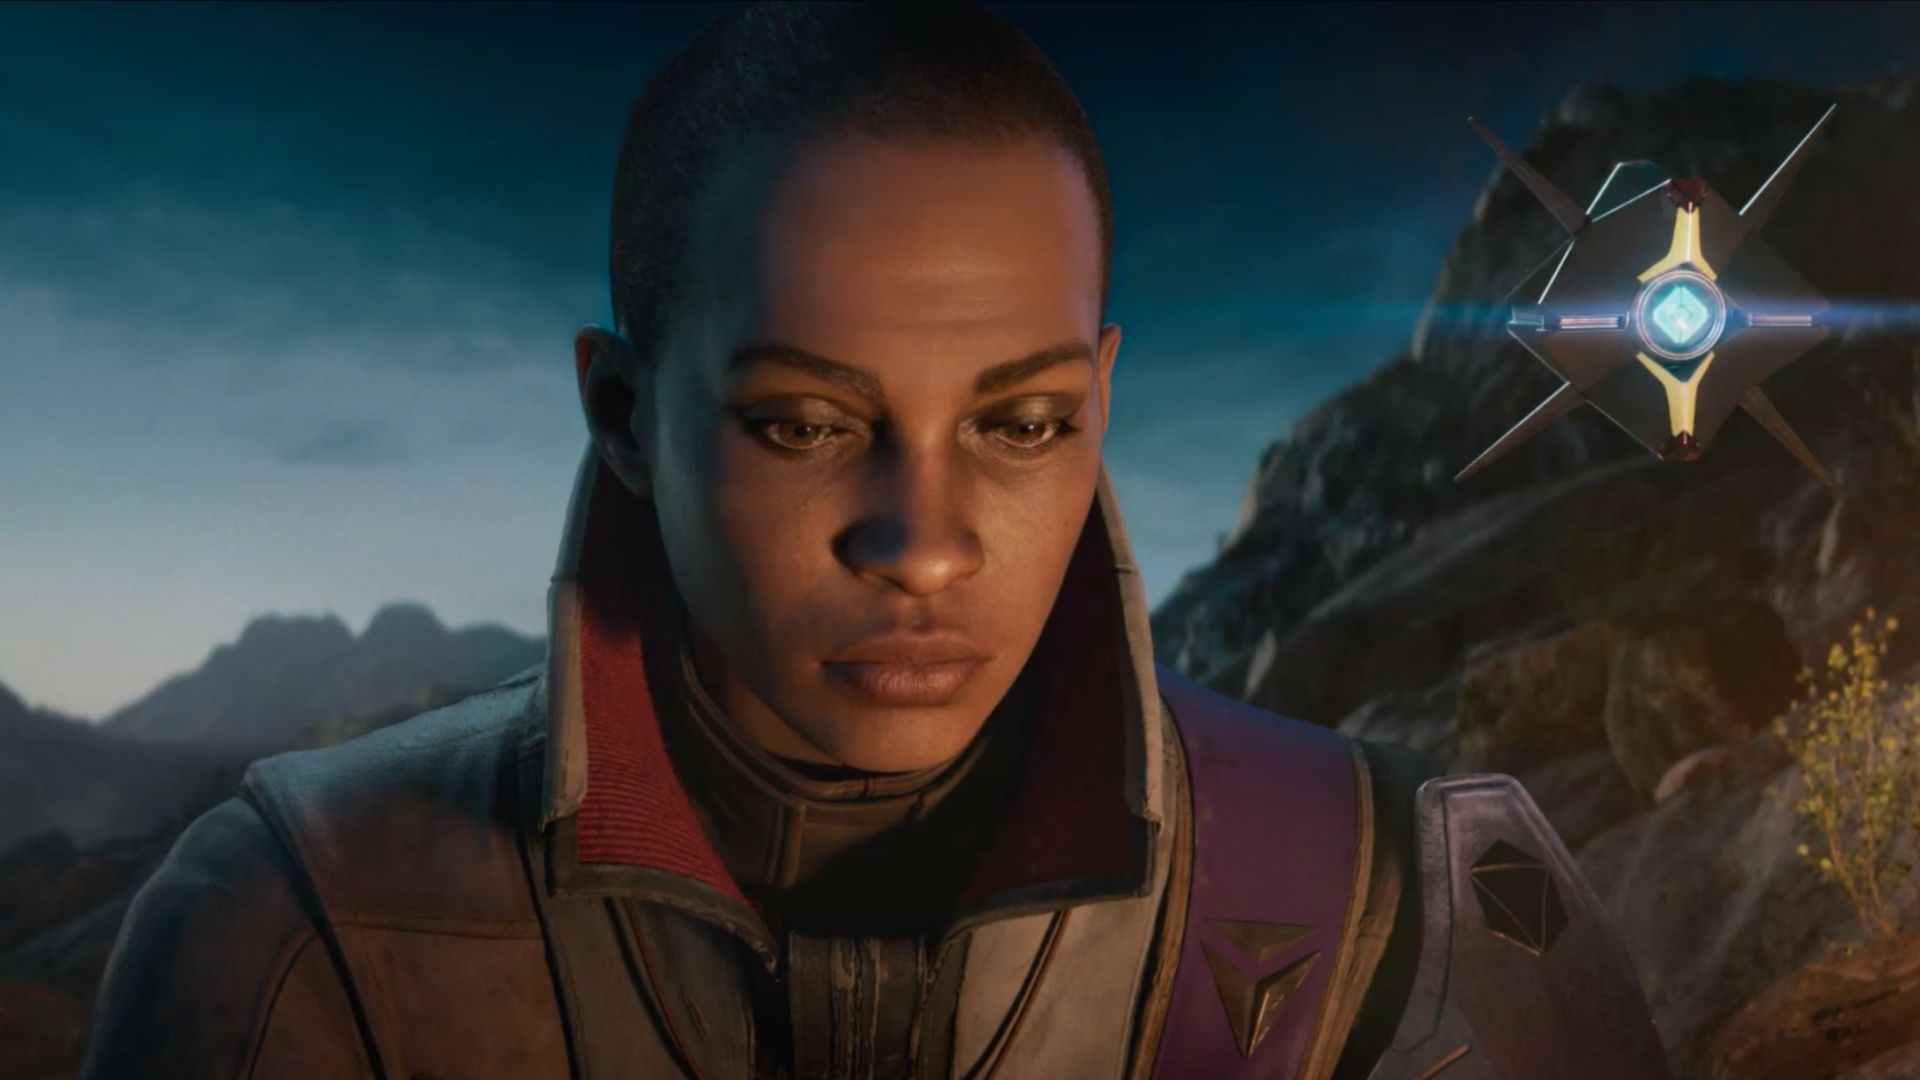 Destiny 2 The Final Shape release date, trailer, and story